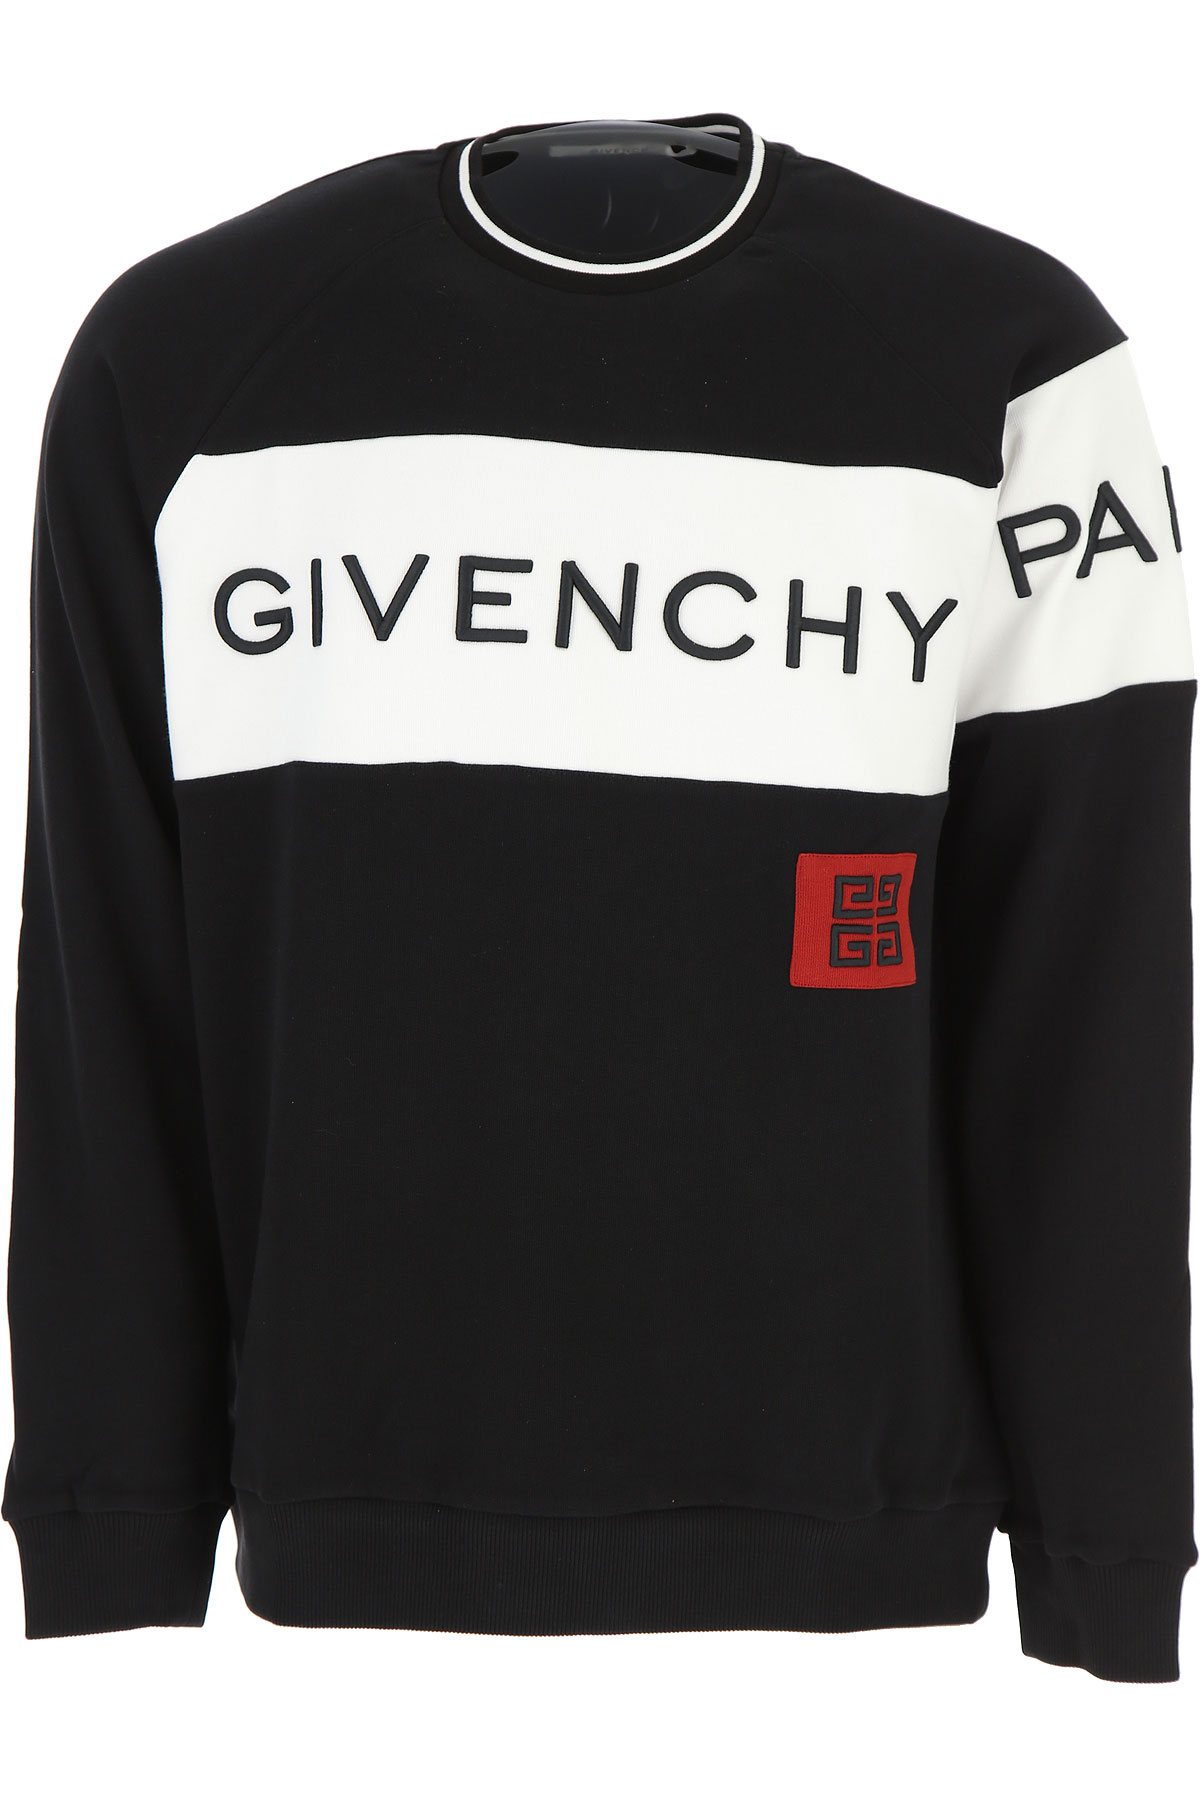 Mens Clothing Givenchy, Style code: bm708t3003-001-